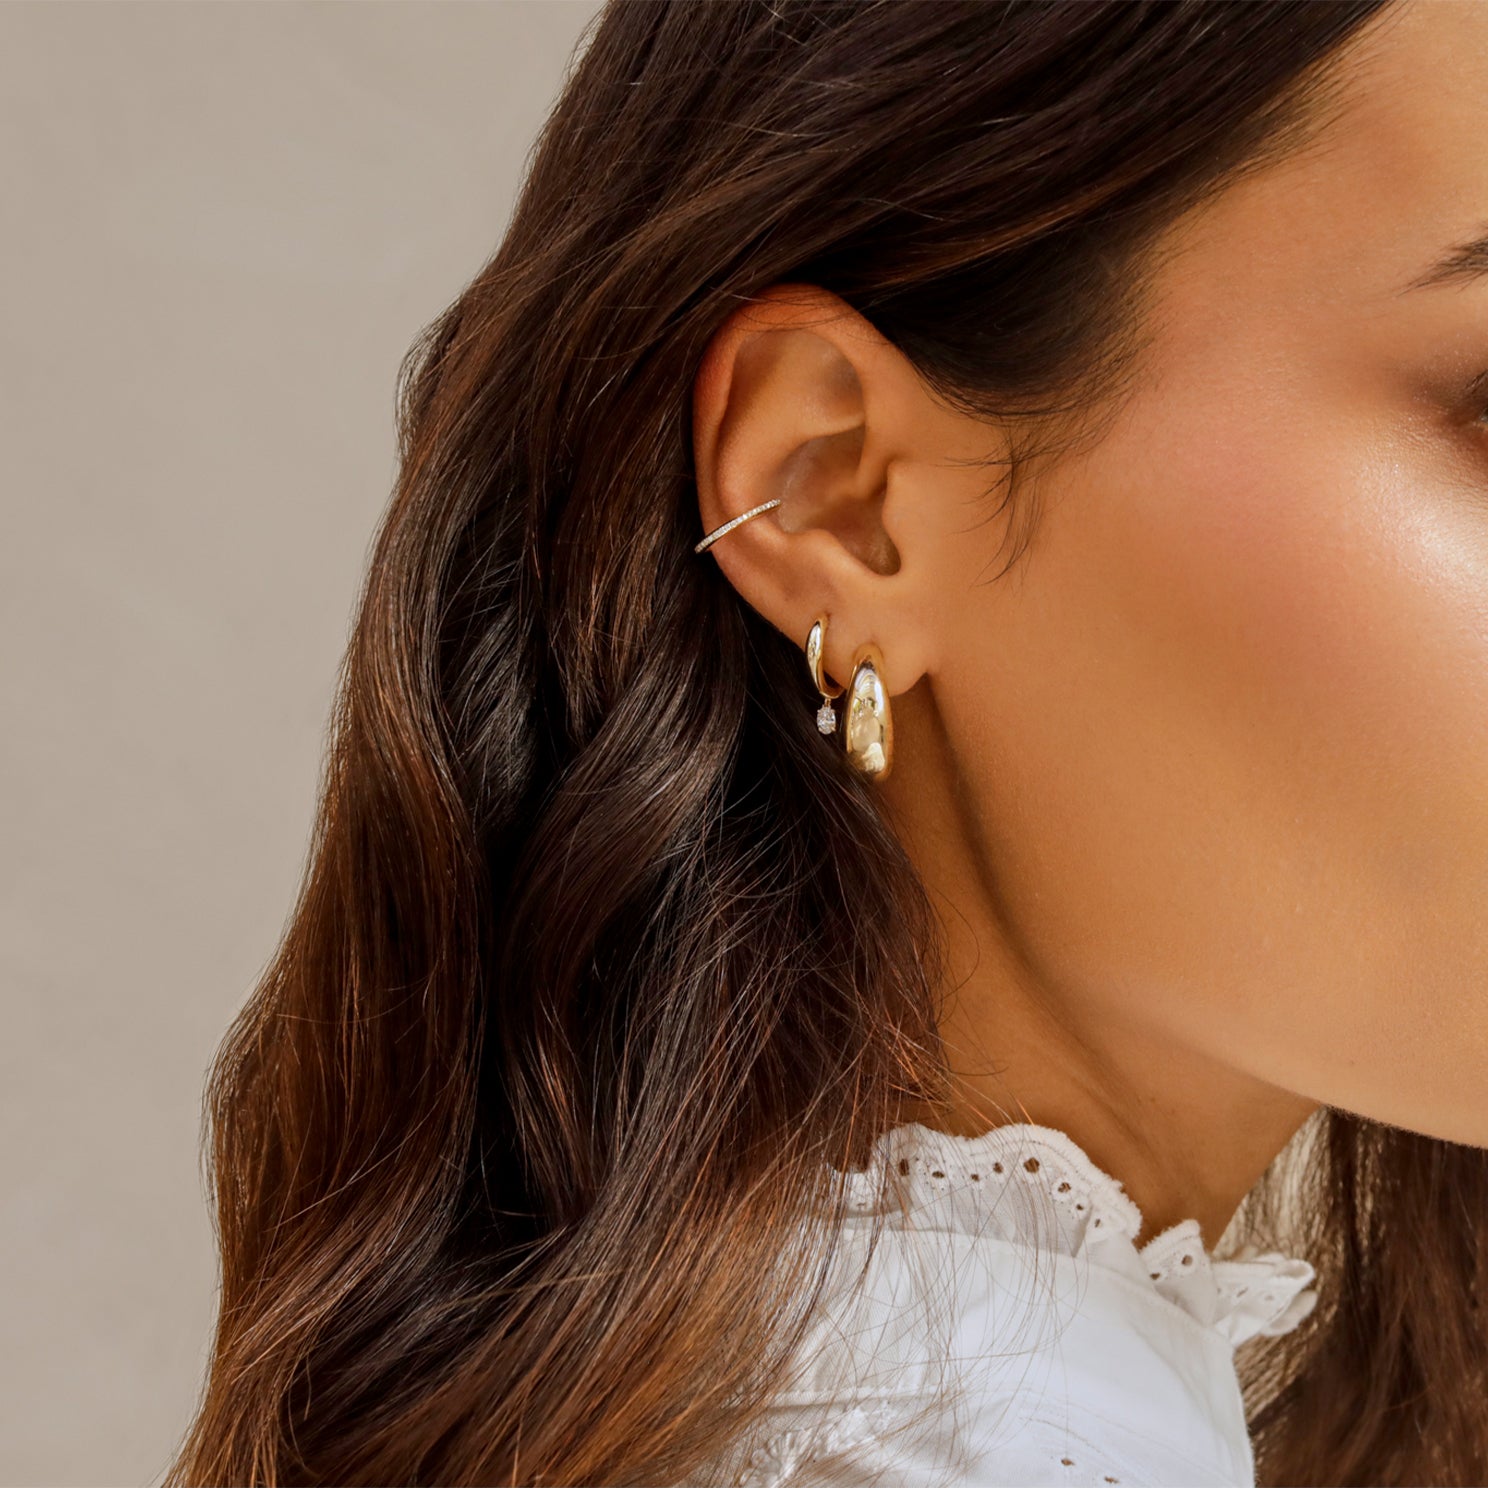 Diamond Oval Drop Gold Dome Huggie Earring in 14k yellow gold styled on second earring hole of model